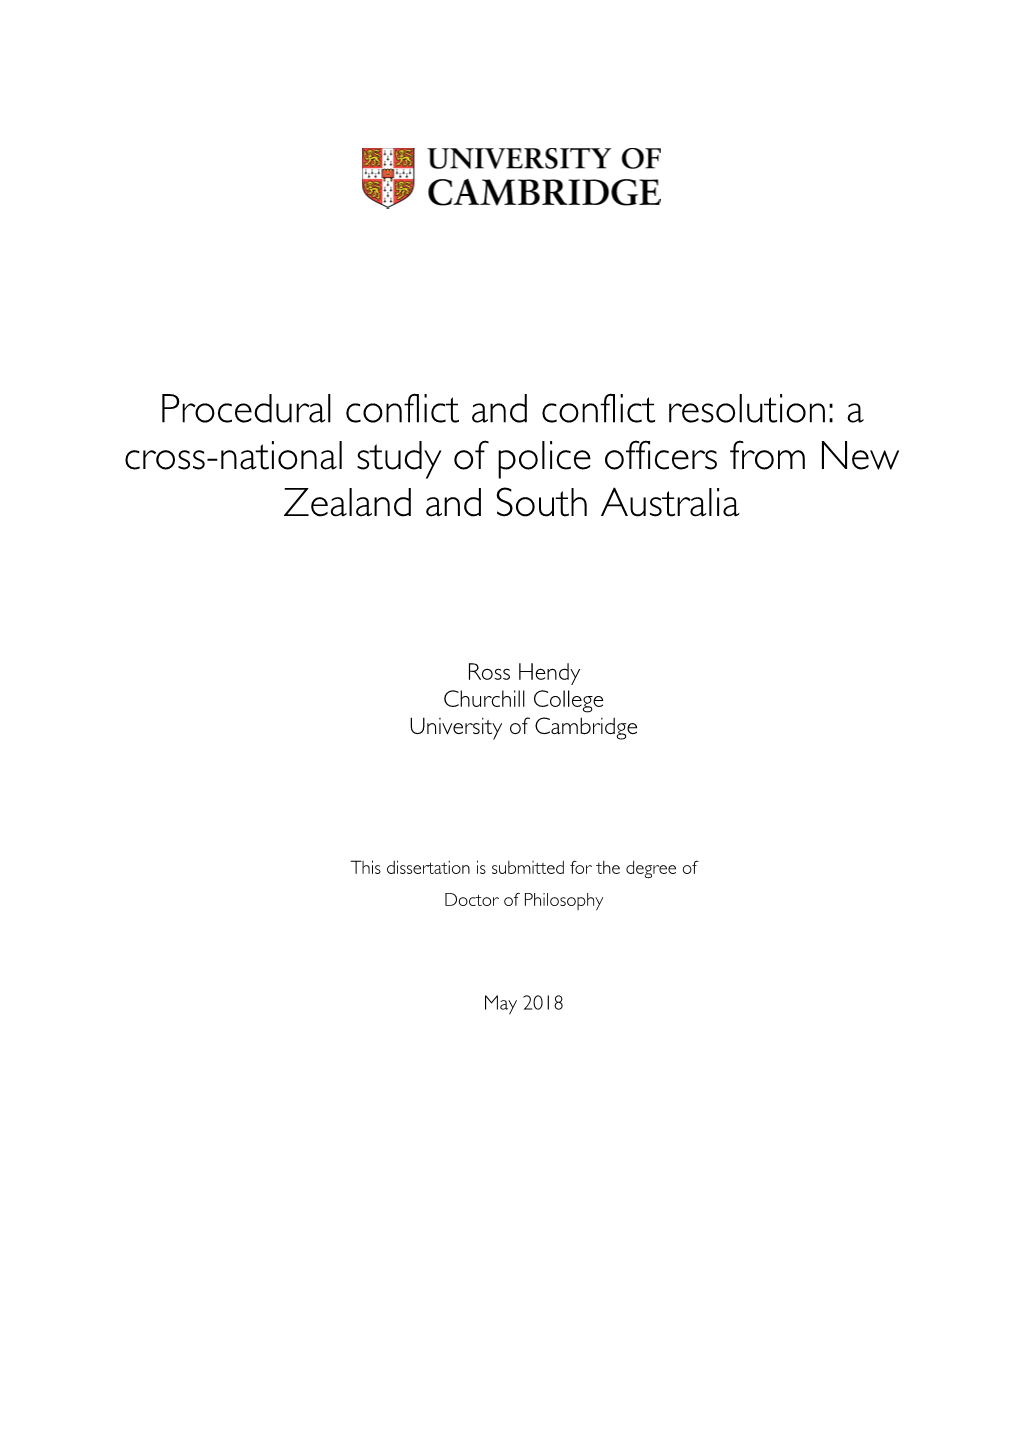 Procedural Conflict and Conflict Resolution: a Cross-National Study of Police Officers from New Zealand and South Australia